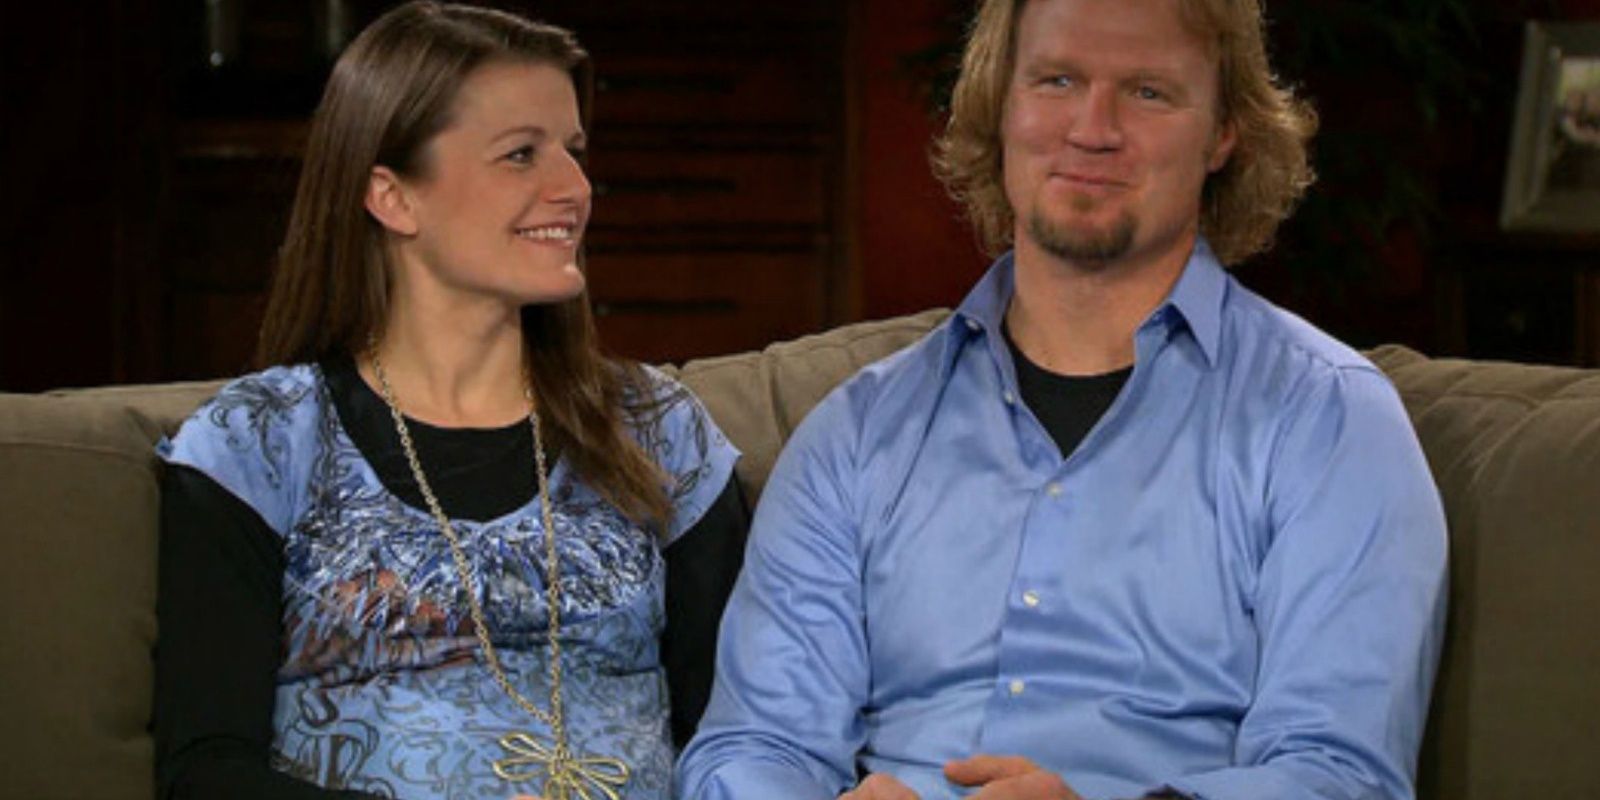 Robyn Brown and Kody Brown from Sister Wives in a confessional together